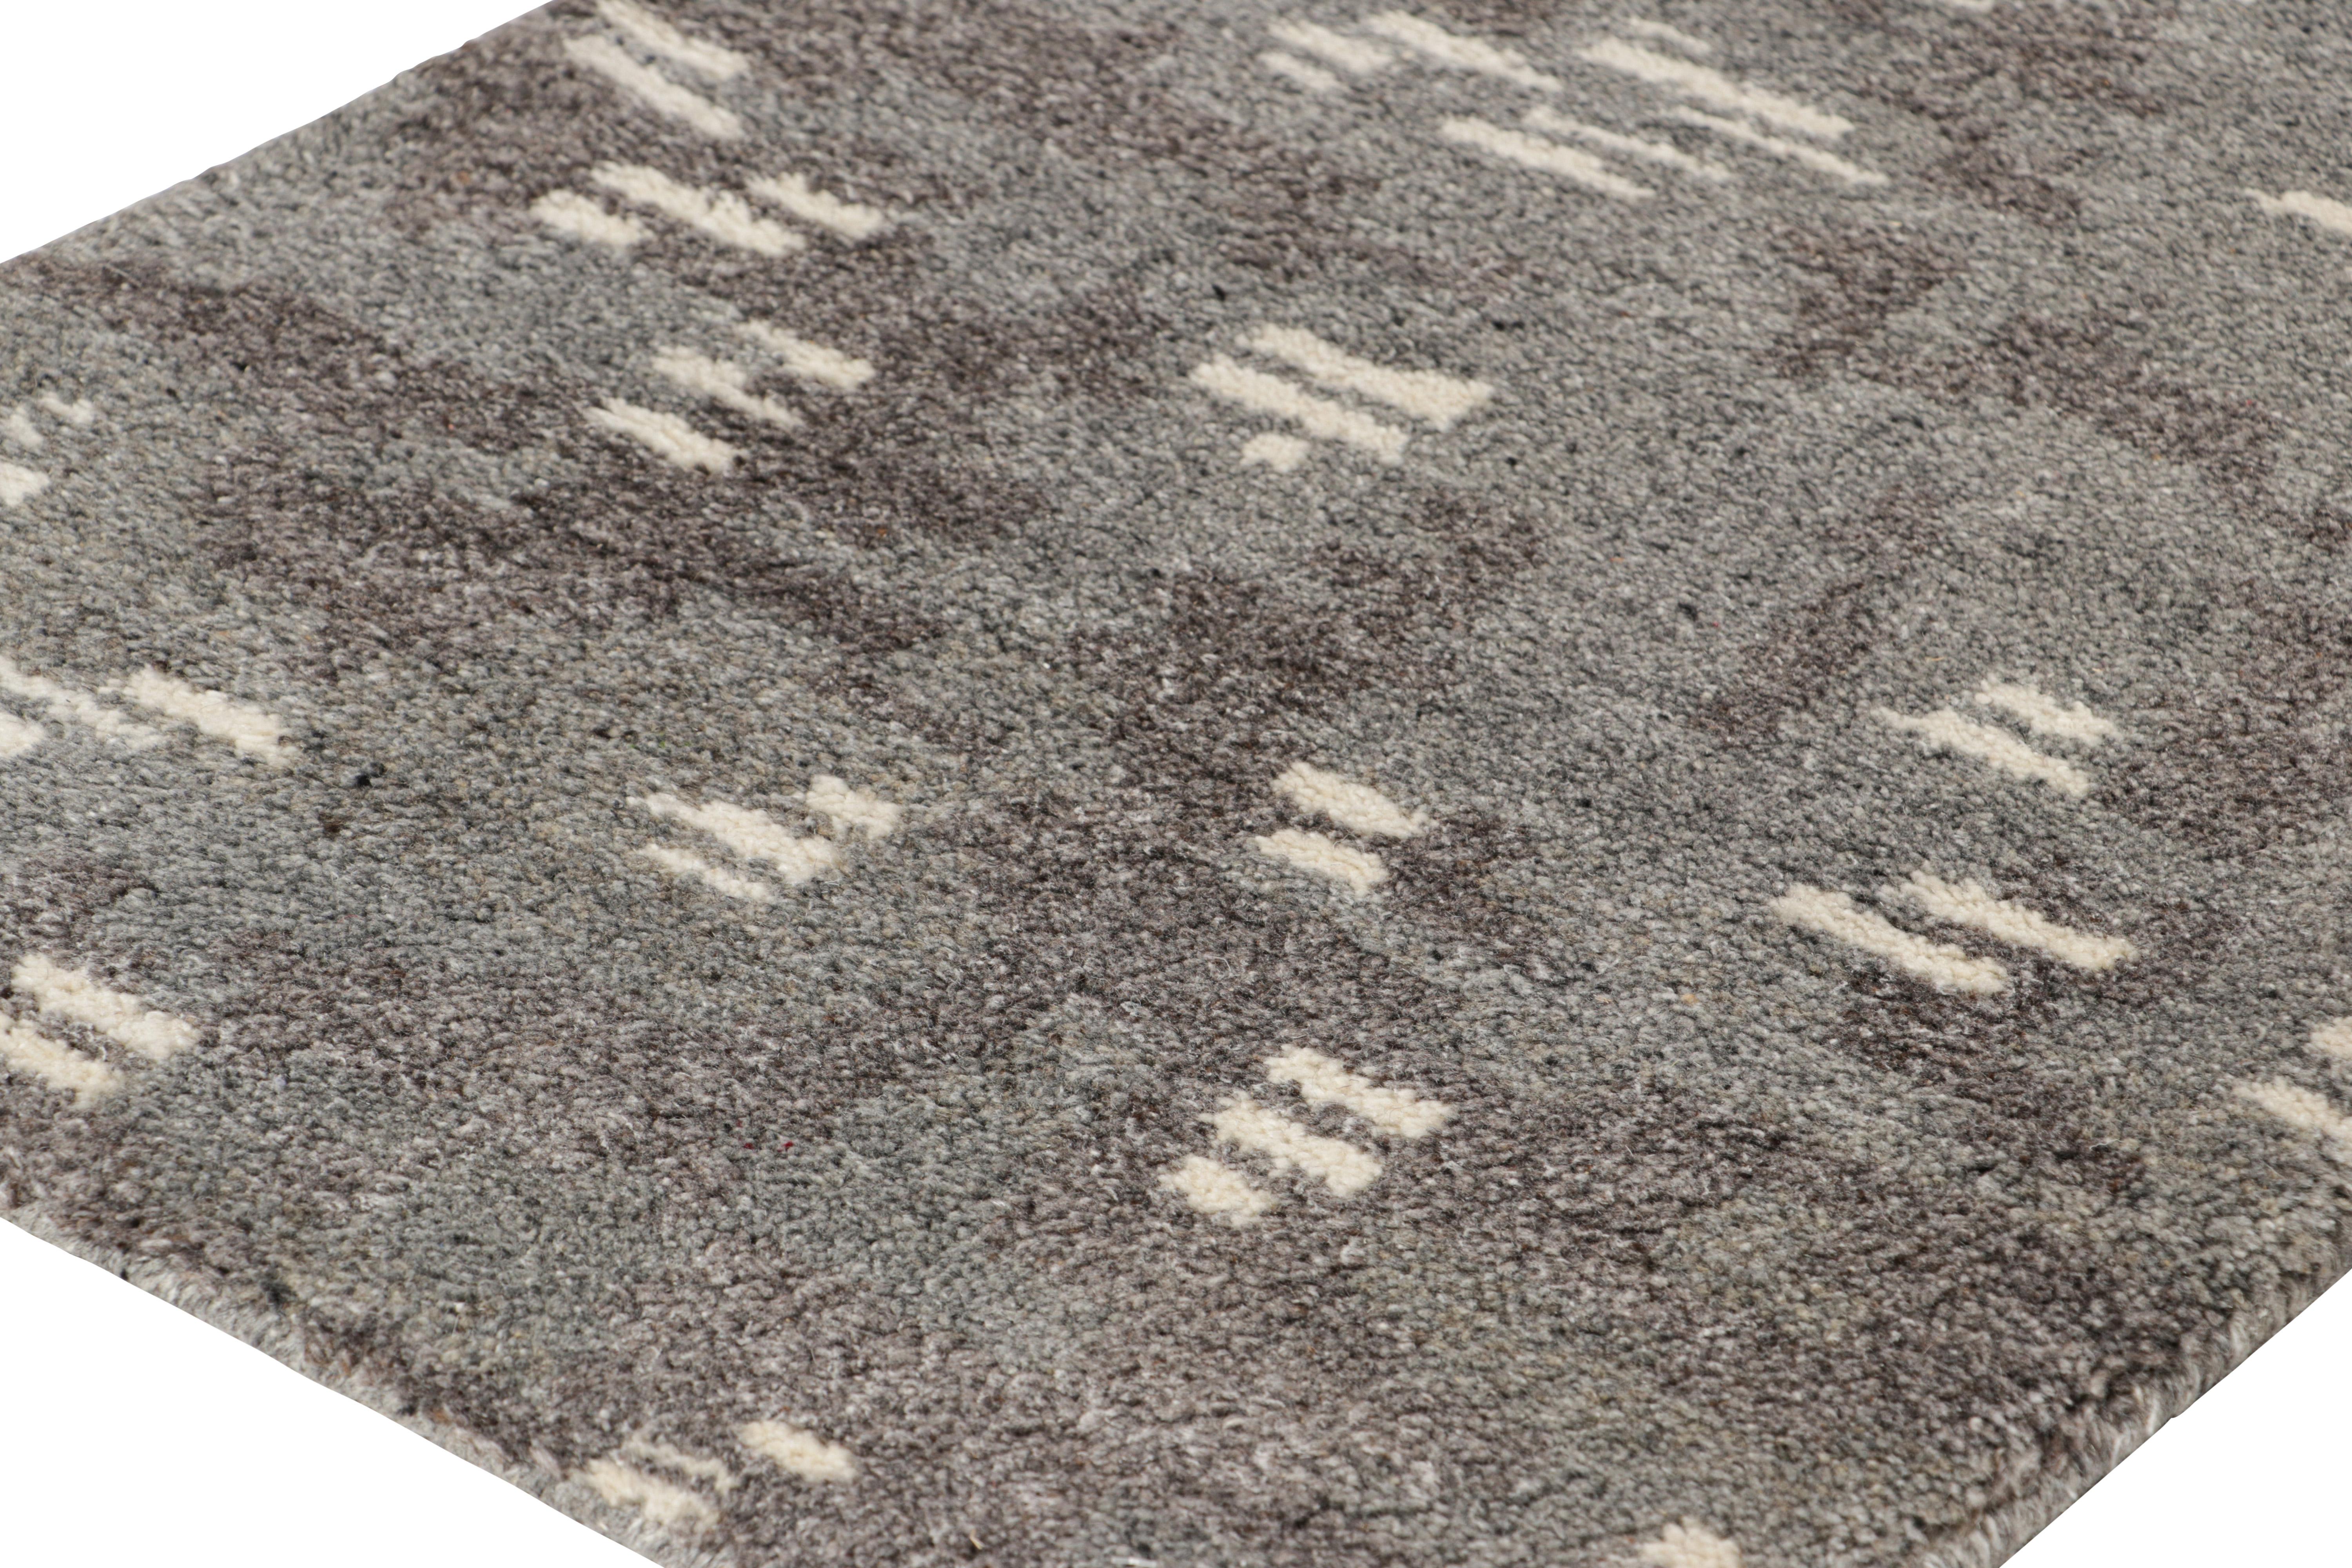 Hand-knotted in wool, this 2x3 modern rug enjoys a cozy, lush pile with an abstract play of subtle color variations and geometric patterns, underscored by charcoal gray, black, and white tones respectively 

On the Design: 

Connoisseurs may admire